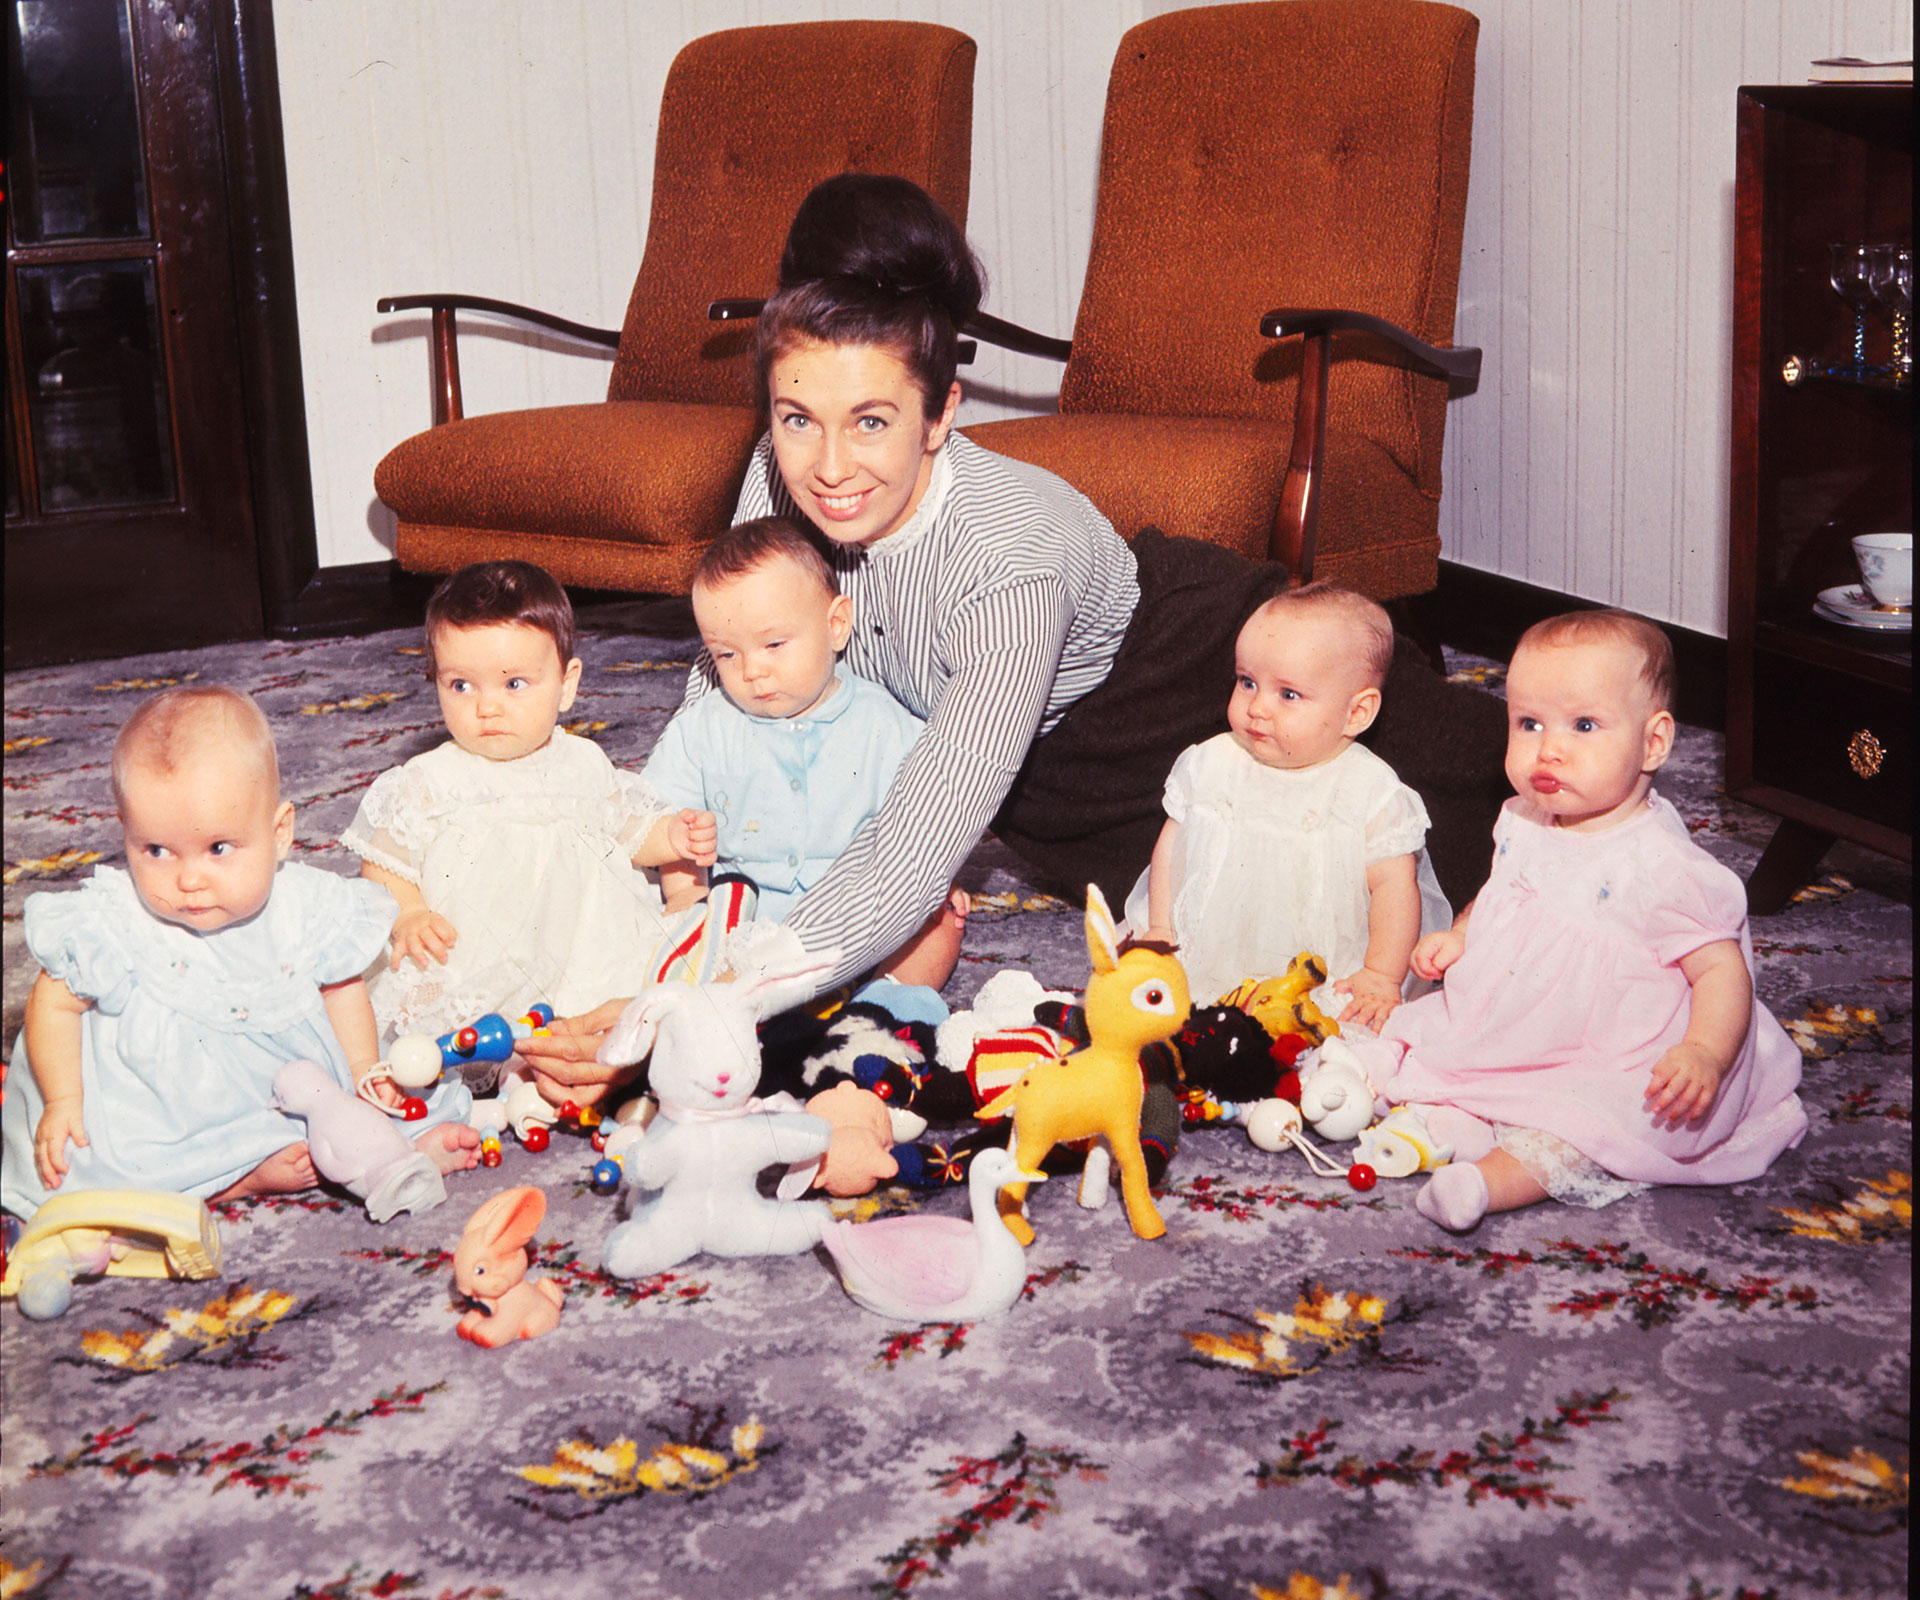 We take a look back at the Lawson quins, New Zealand's first quintuplets, in their early years.